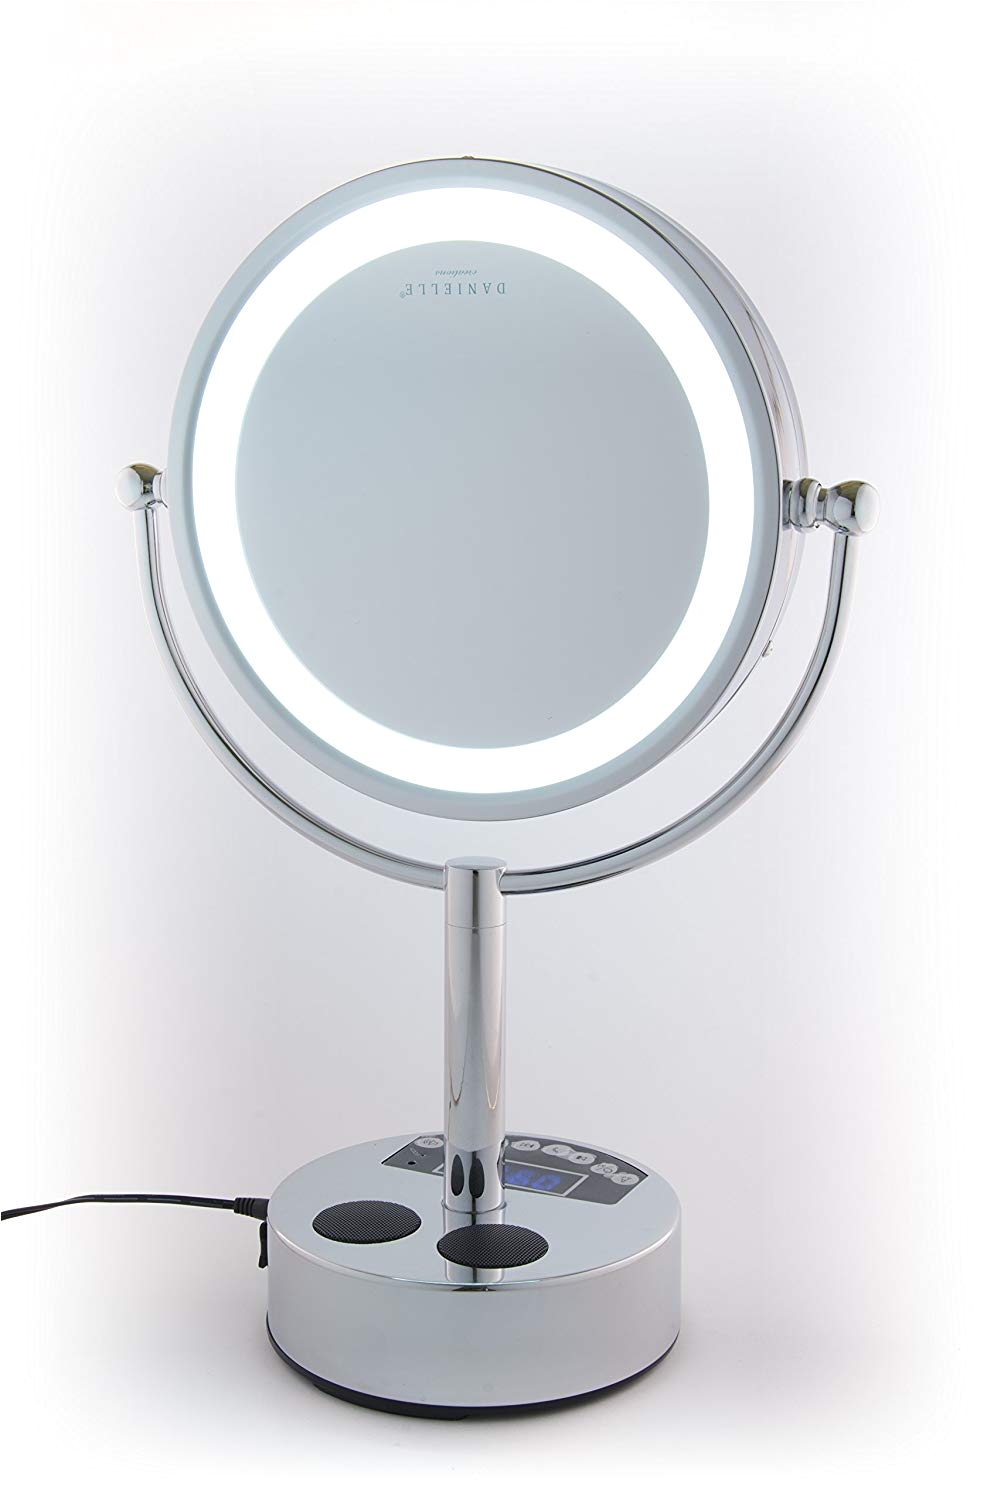 amazon com danielle creations chrome led lighted 2 sided swivel vanity make up mirror 10x magnification beauty